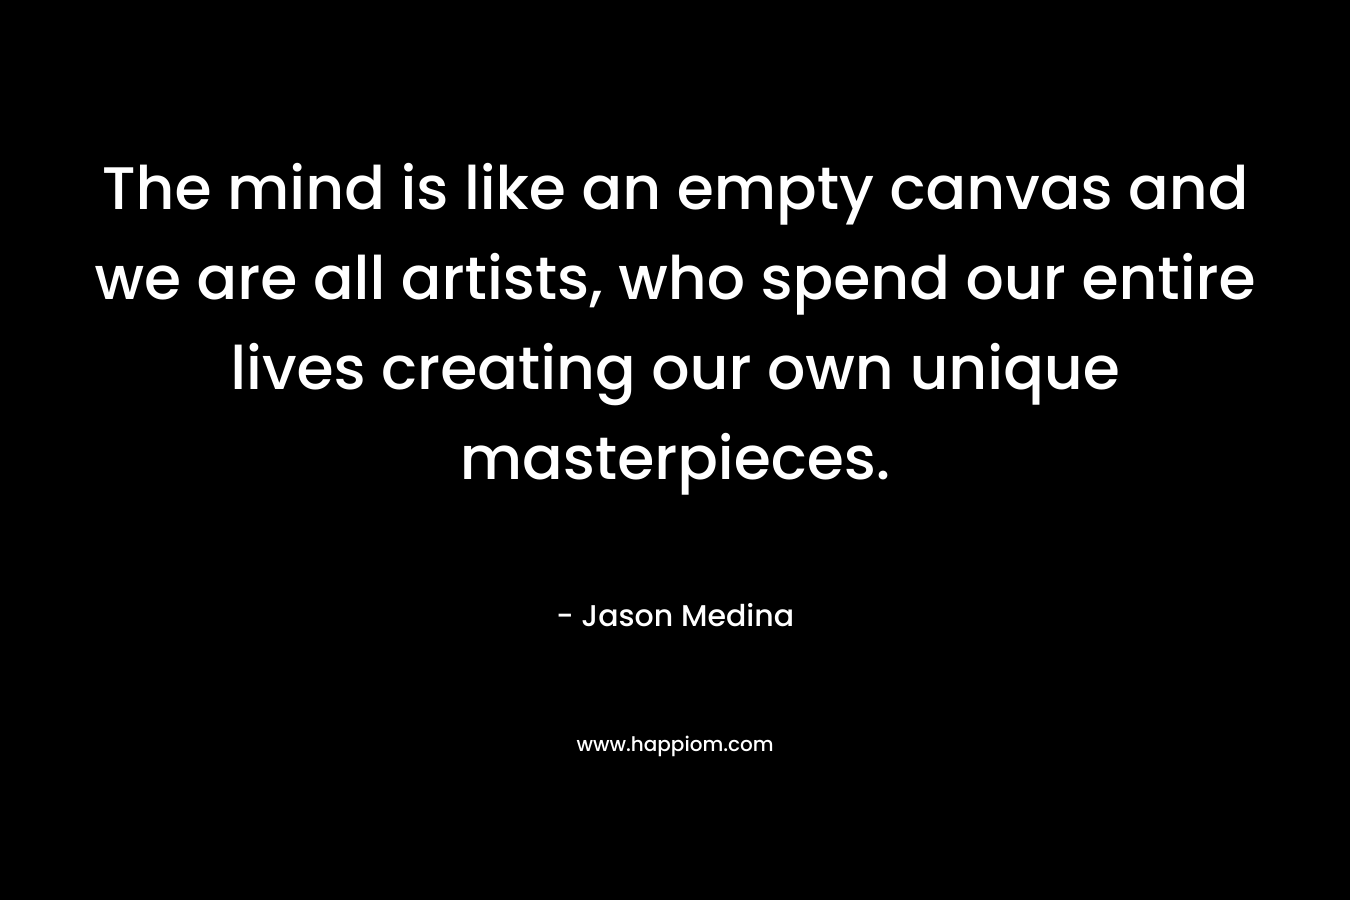 The mind is like an empty canvas and we are all artists, who spend our entire lives creating our own unique masterpieces. – Jason Medina